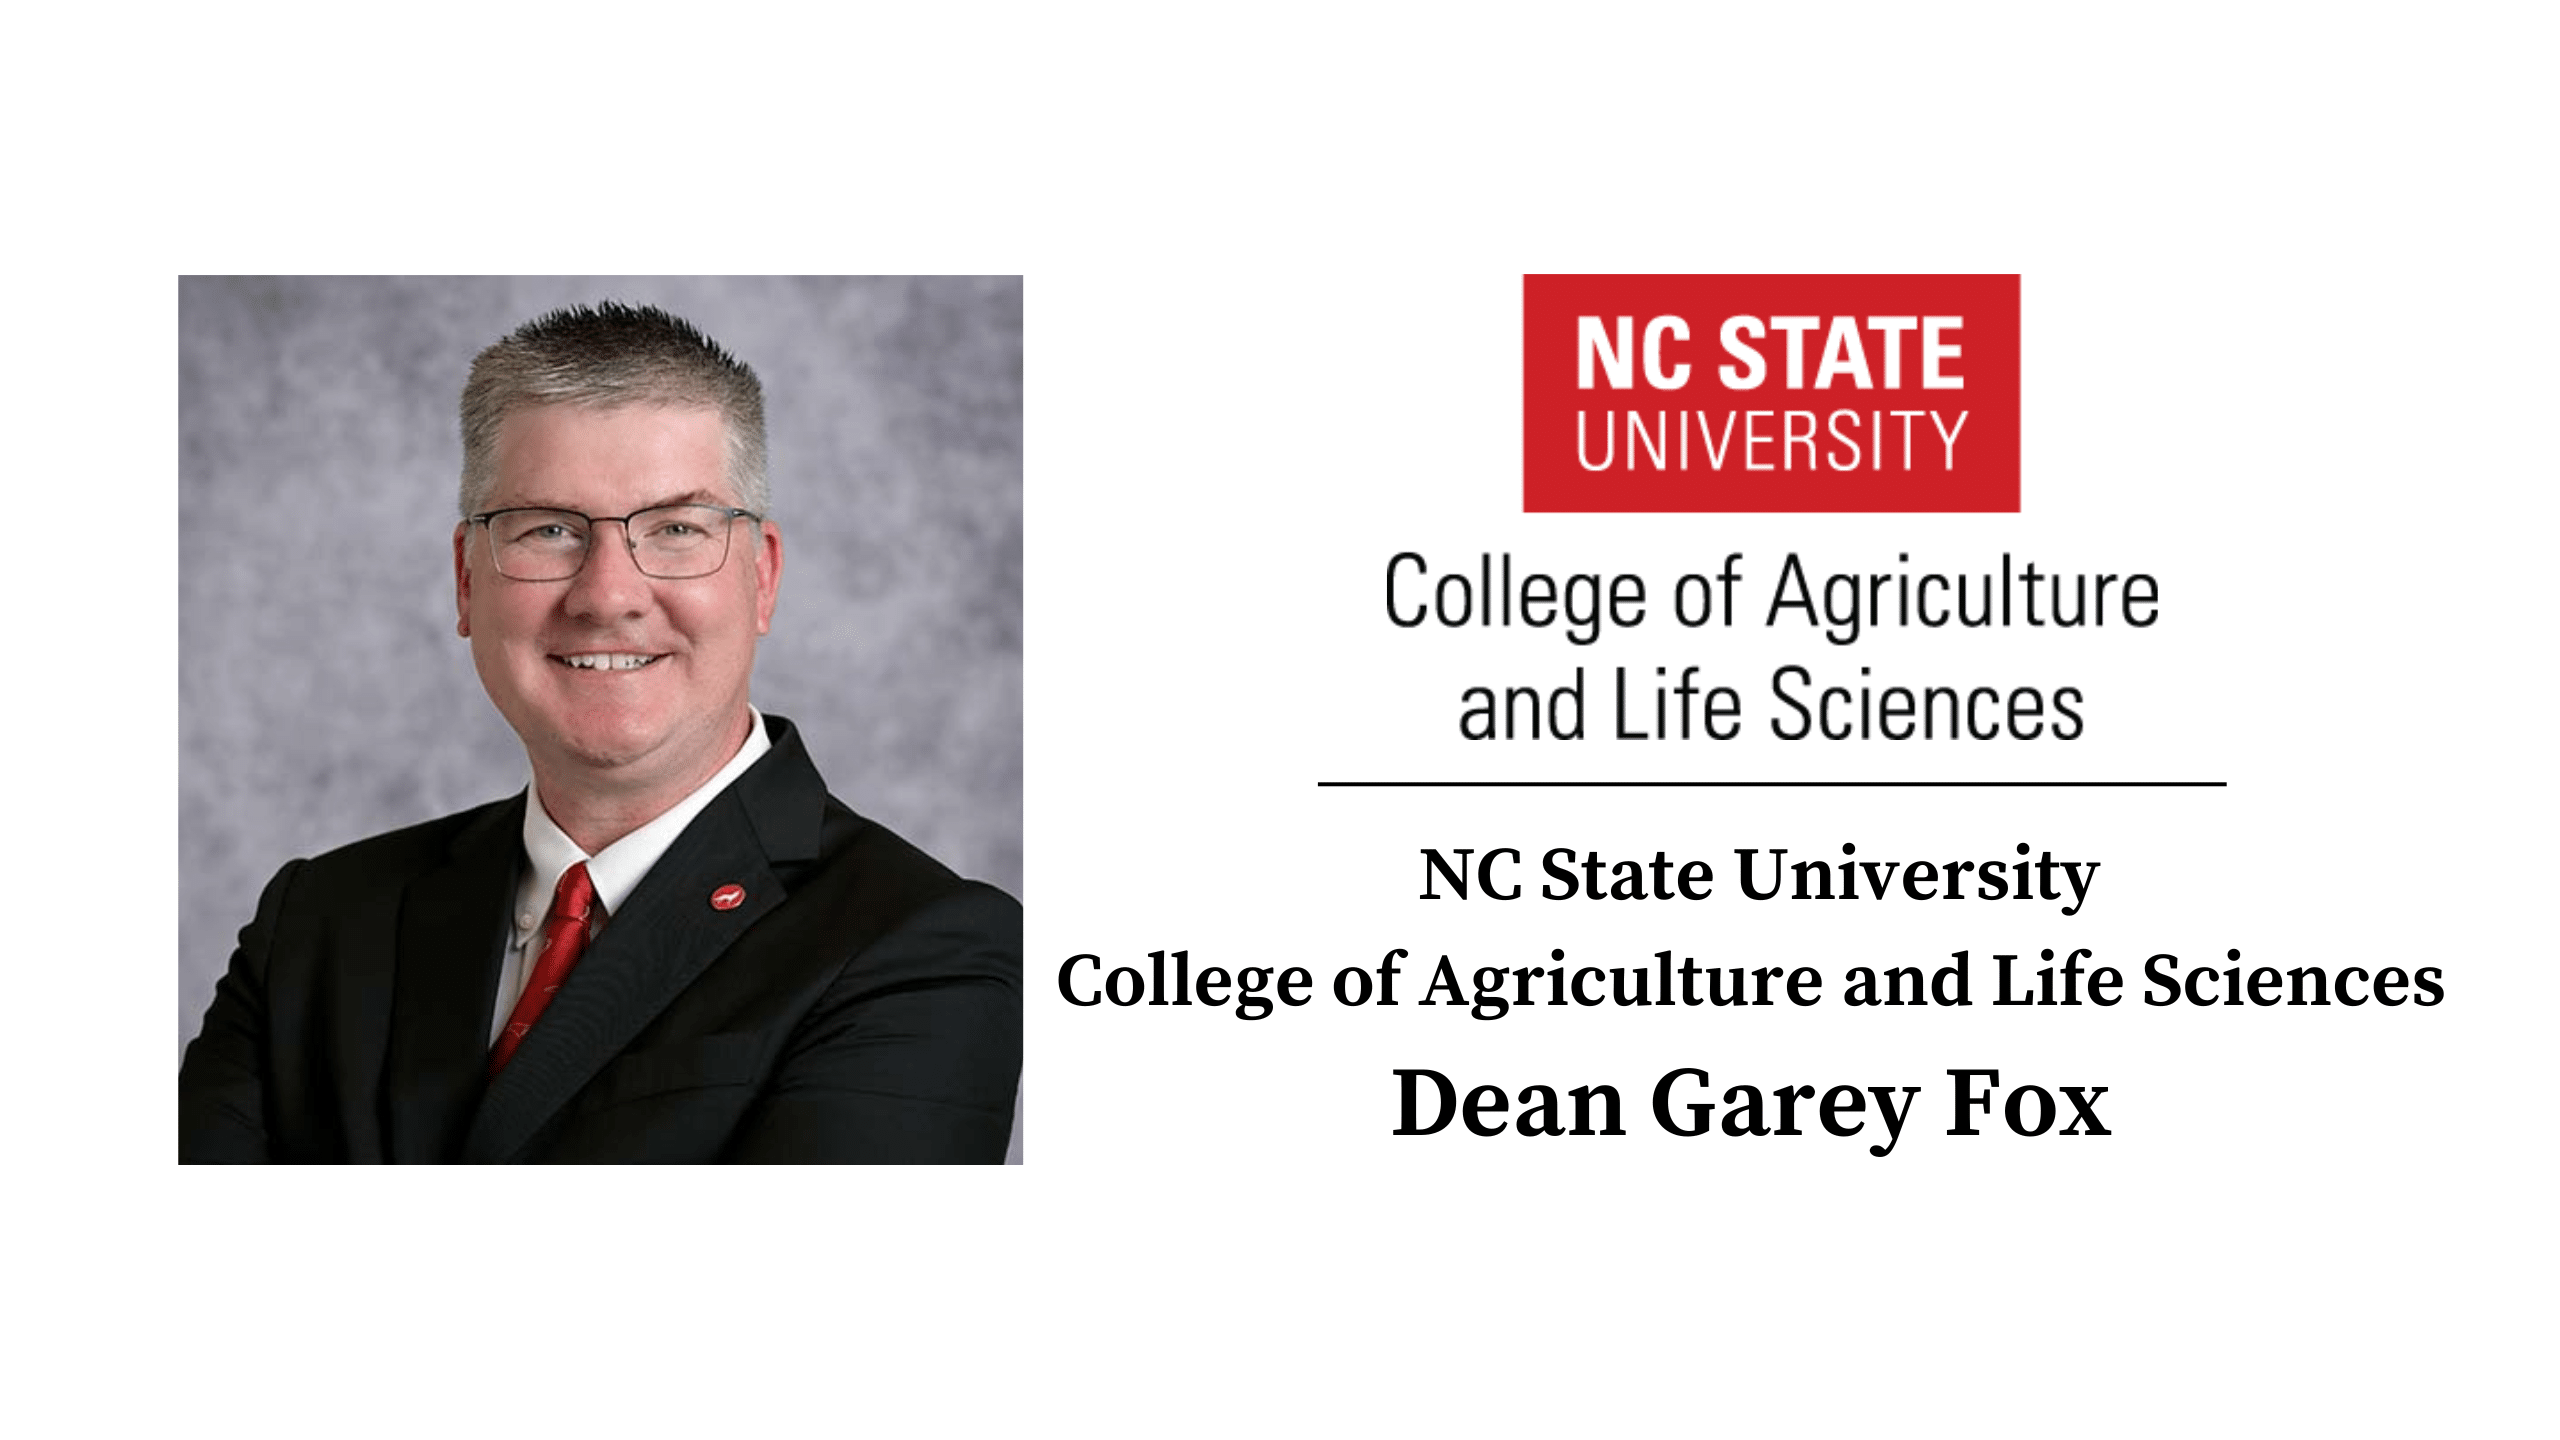 Critical Conversations with Scott T. Hamilton featuring Dr. Garey Fox, Dean of the College of Agriculture and Life Sciences at NC State University